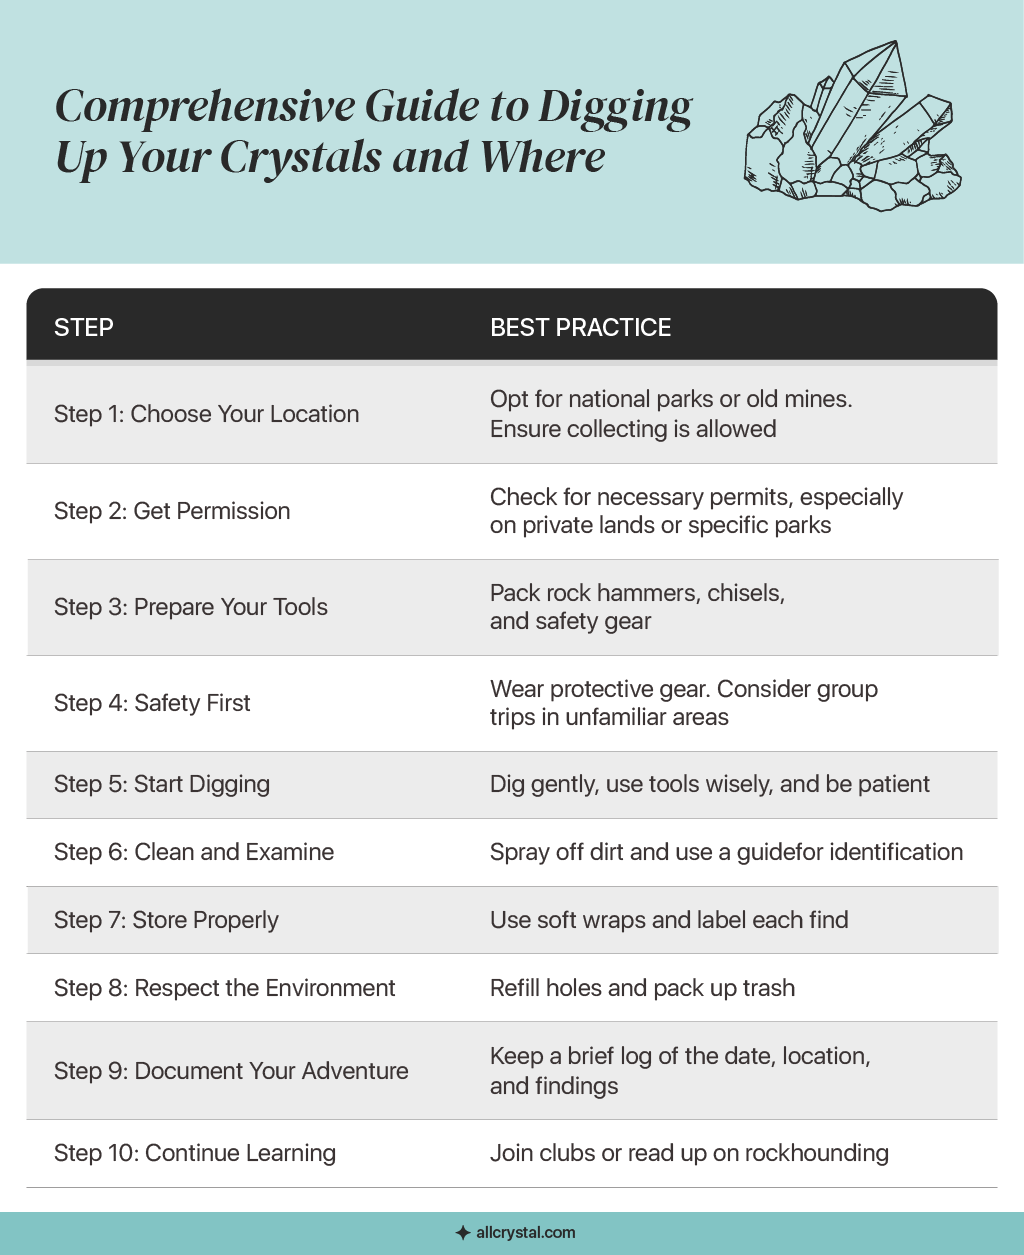 A graphic table containing information about Comprehensive Guide to Digging Up Your Crystals and Where